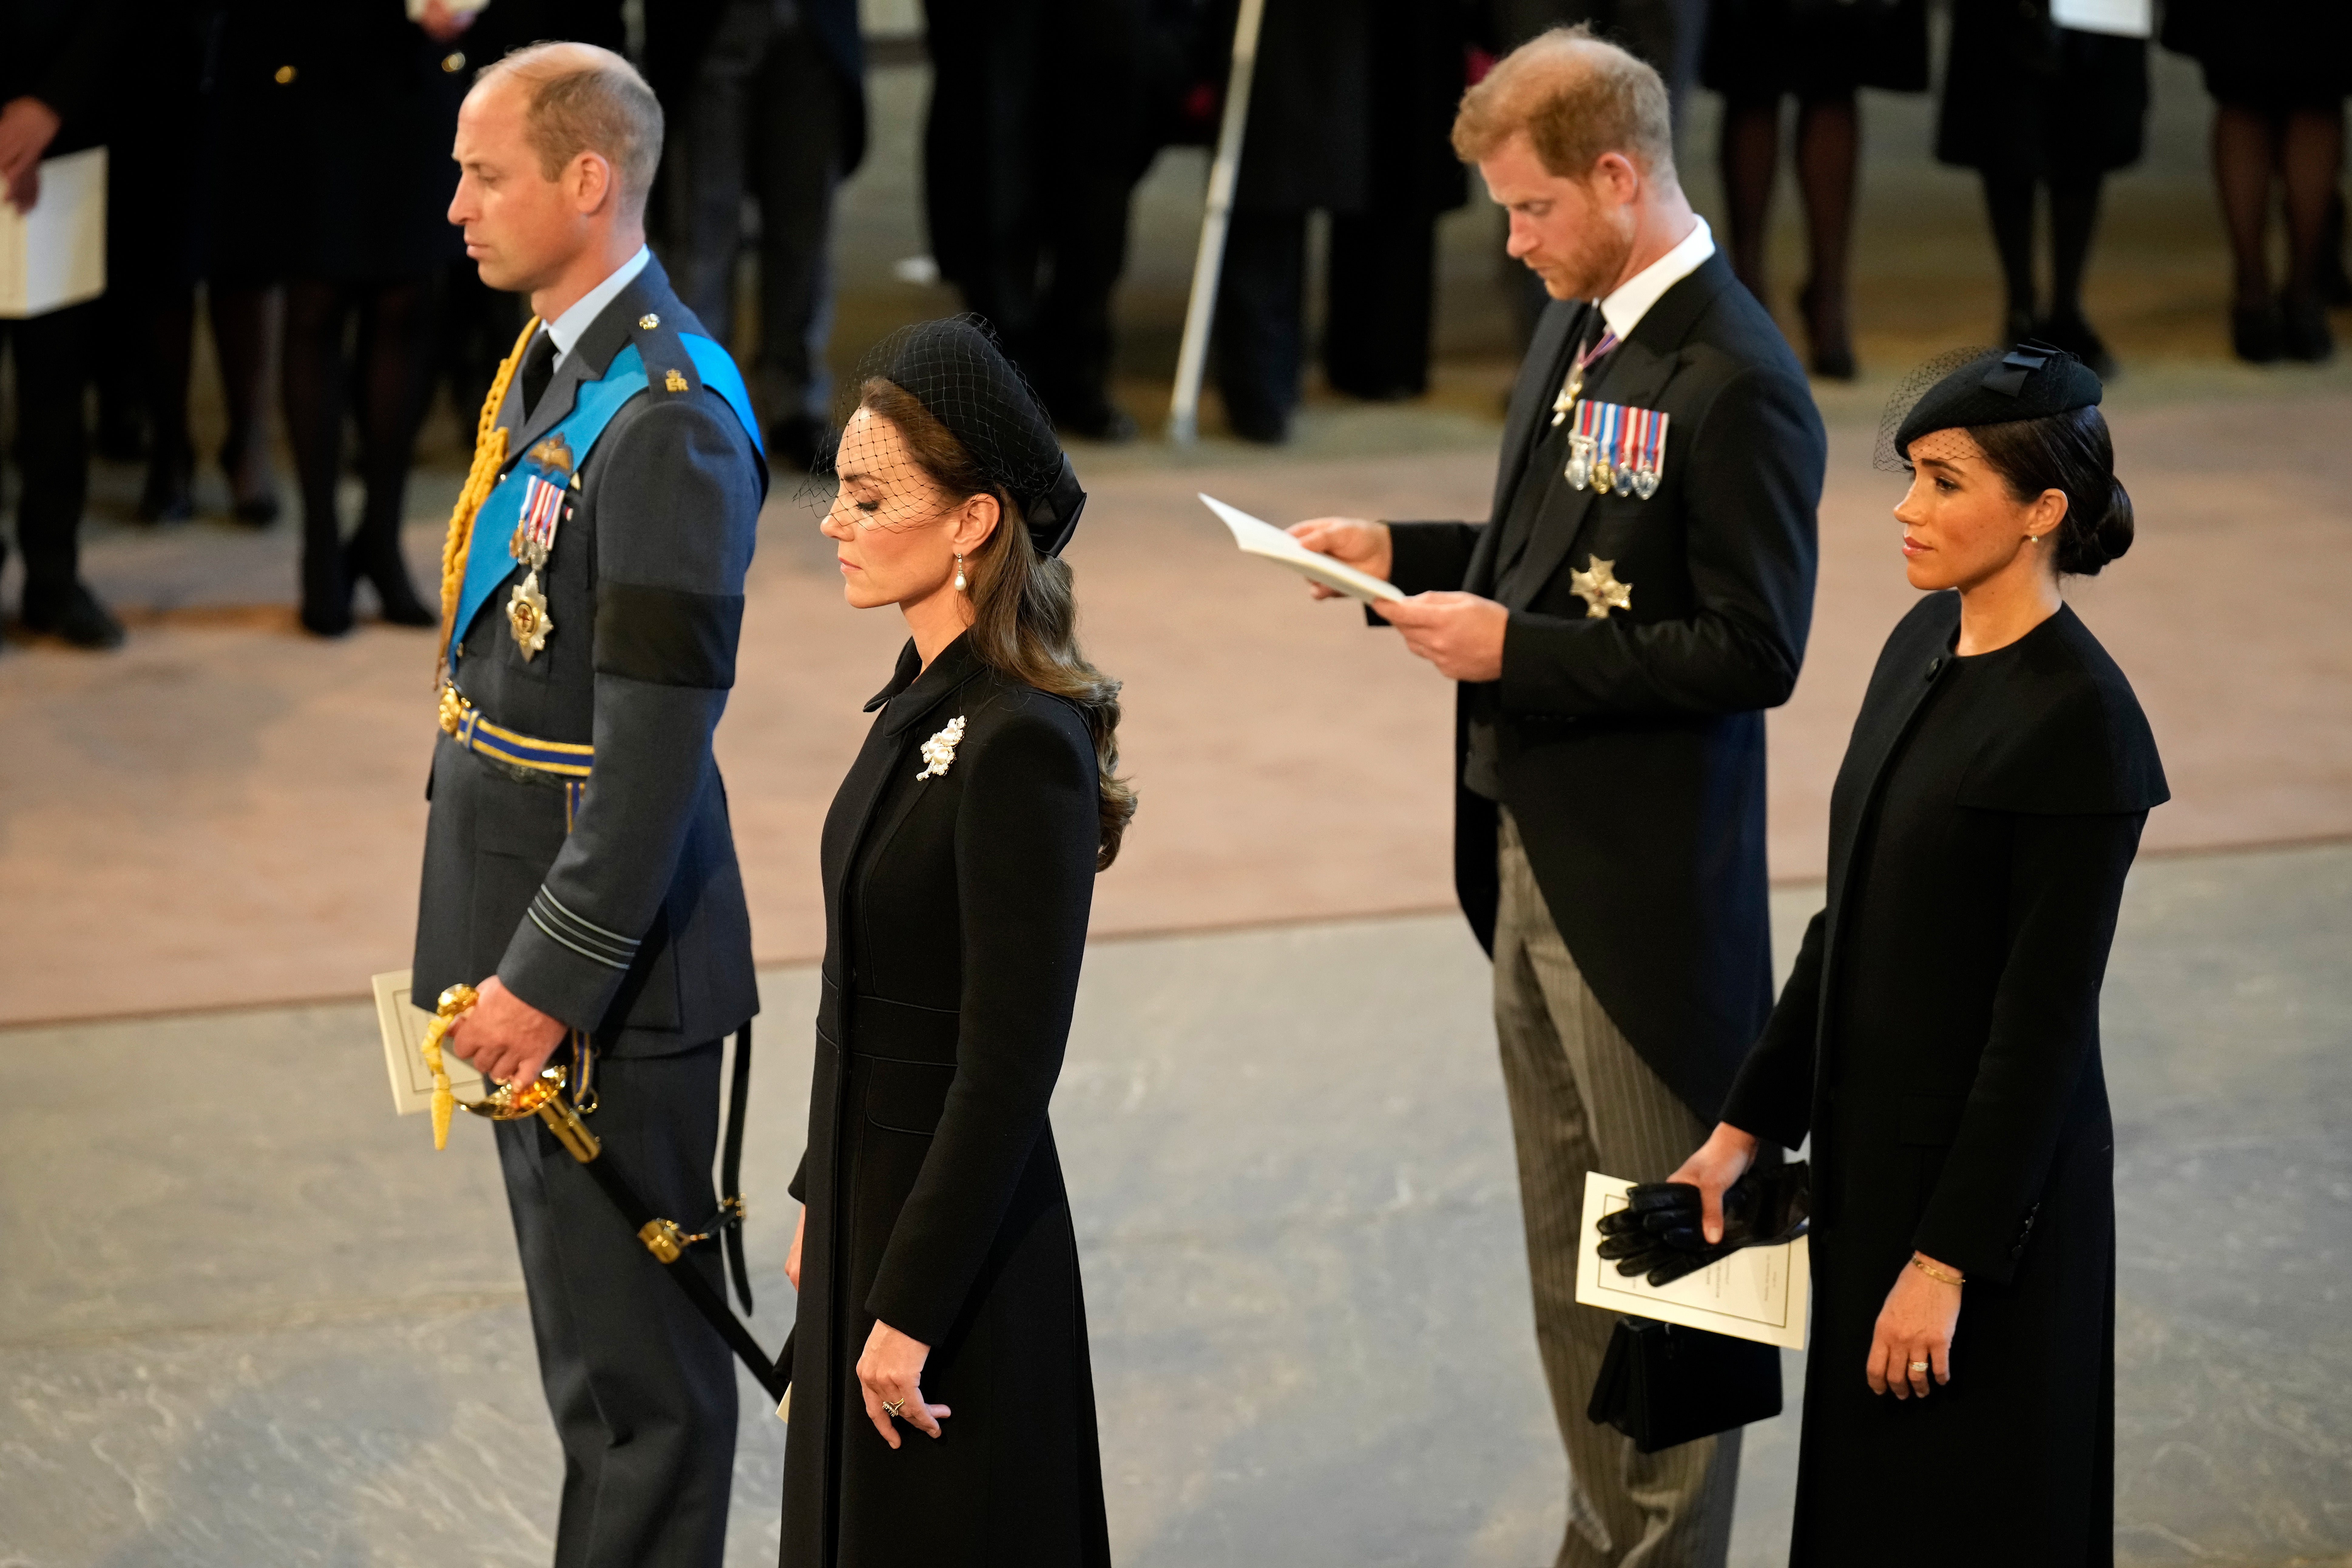 The Prince and Princess of Wales and the Duke and Duchess of Sussex attend service for the Queen